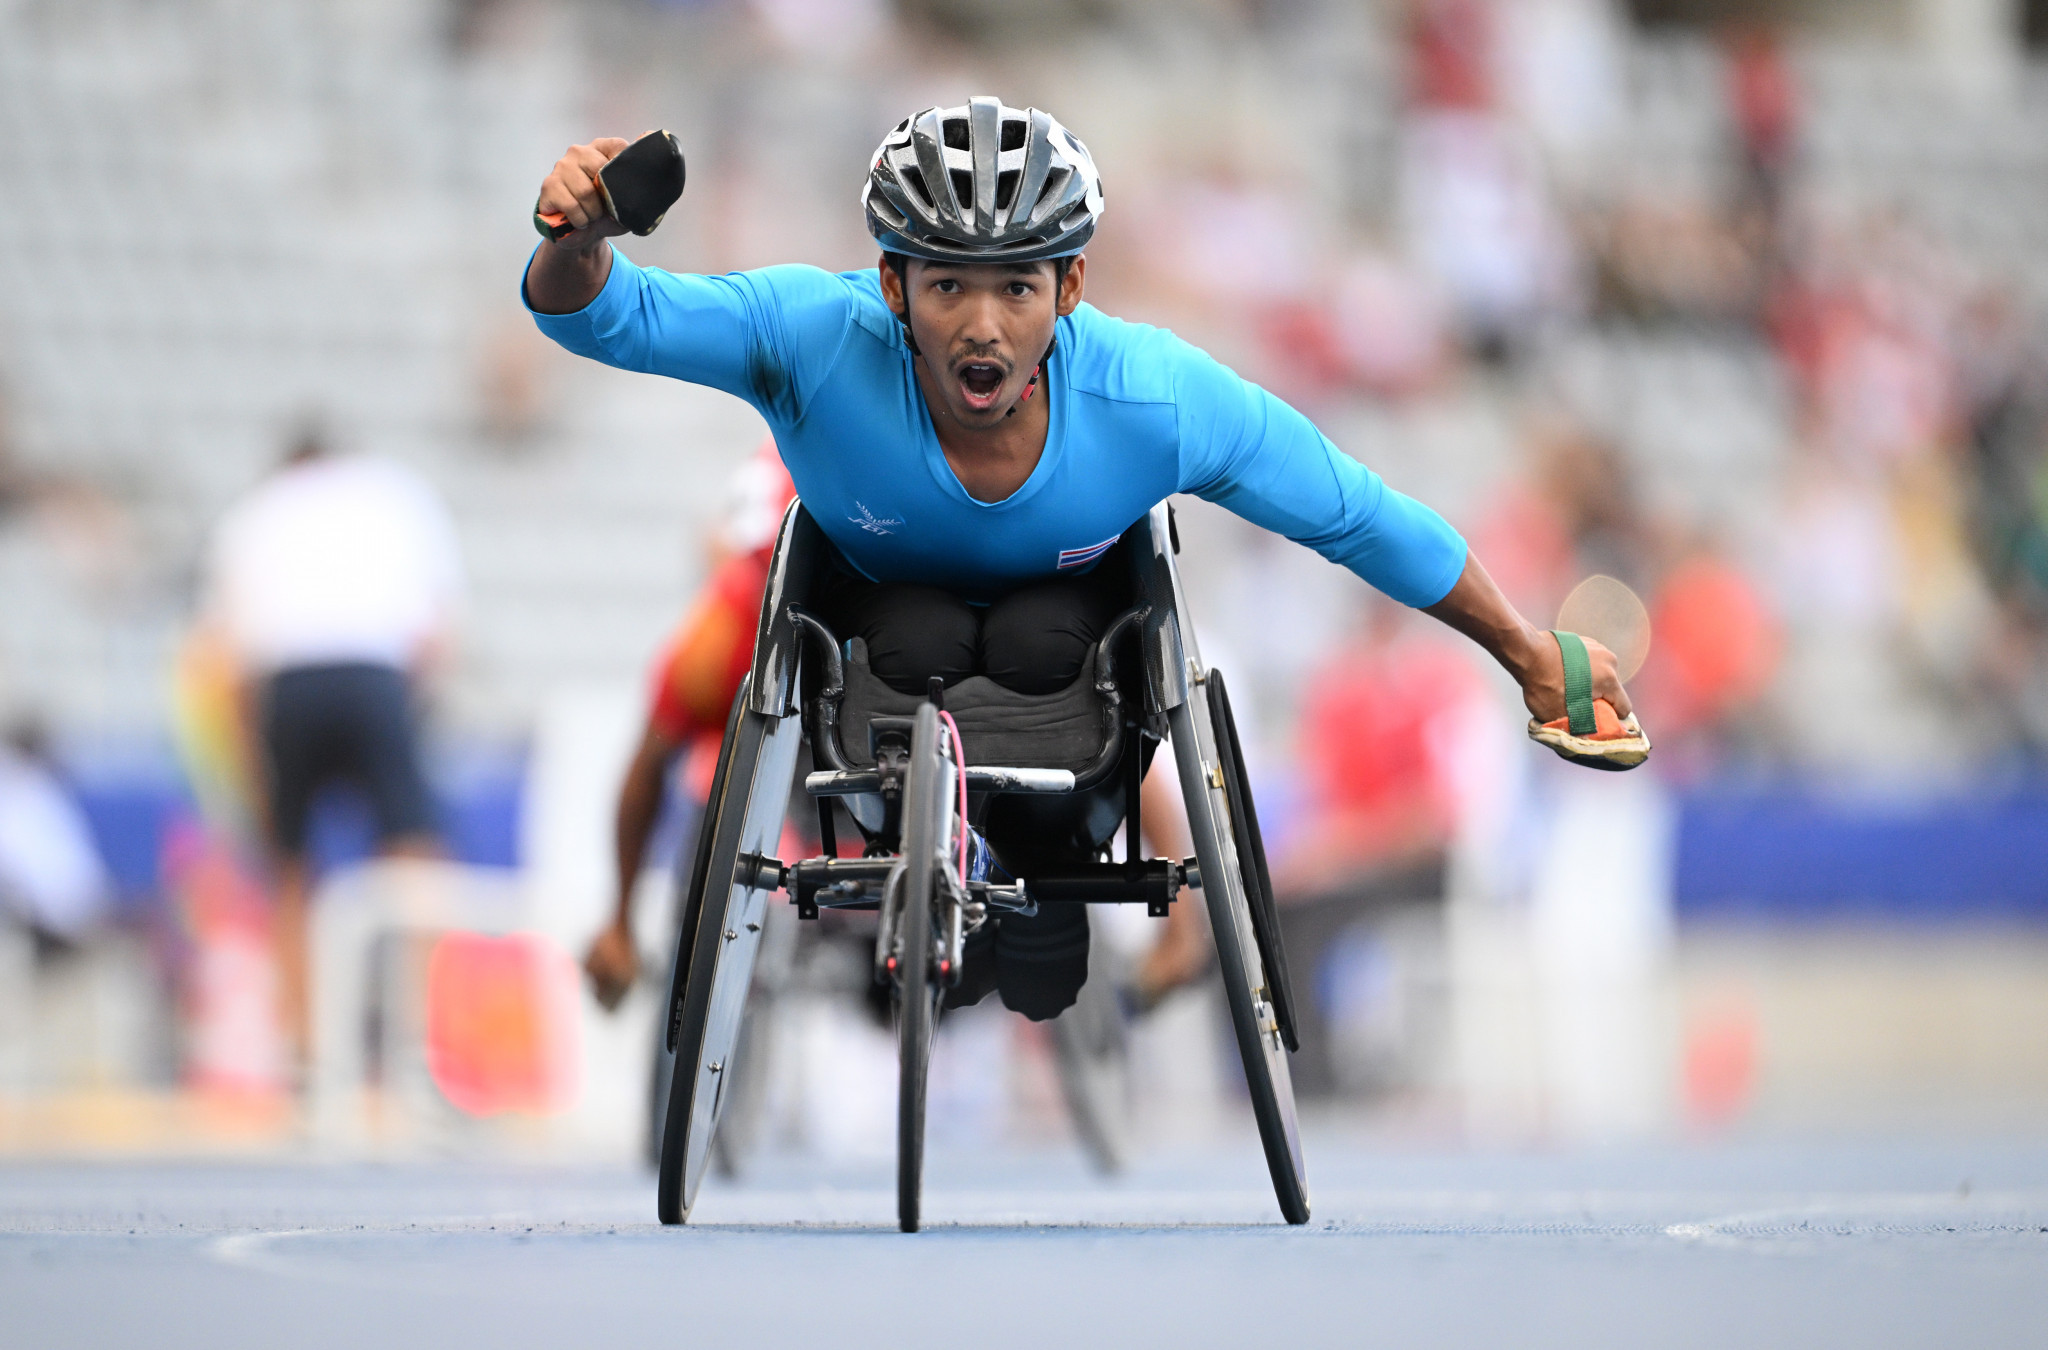 Thailand's Chaiwat Rattana won the men's T34 400m final in a world record 48.65sec ©Getty Images